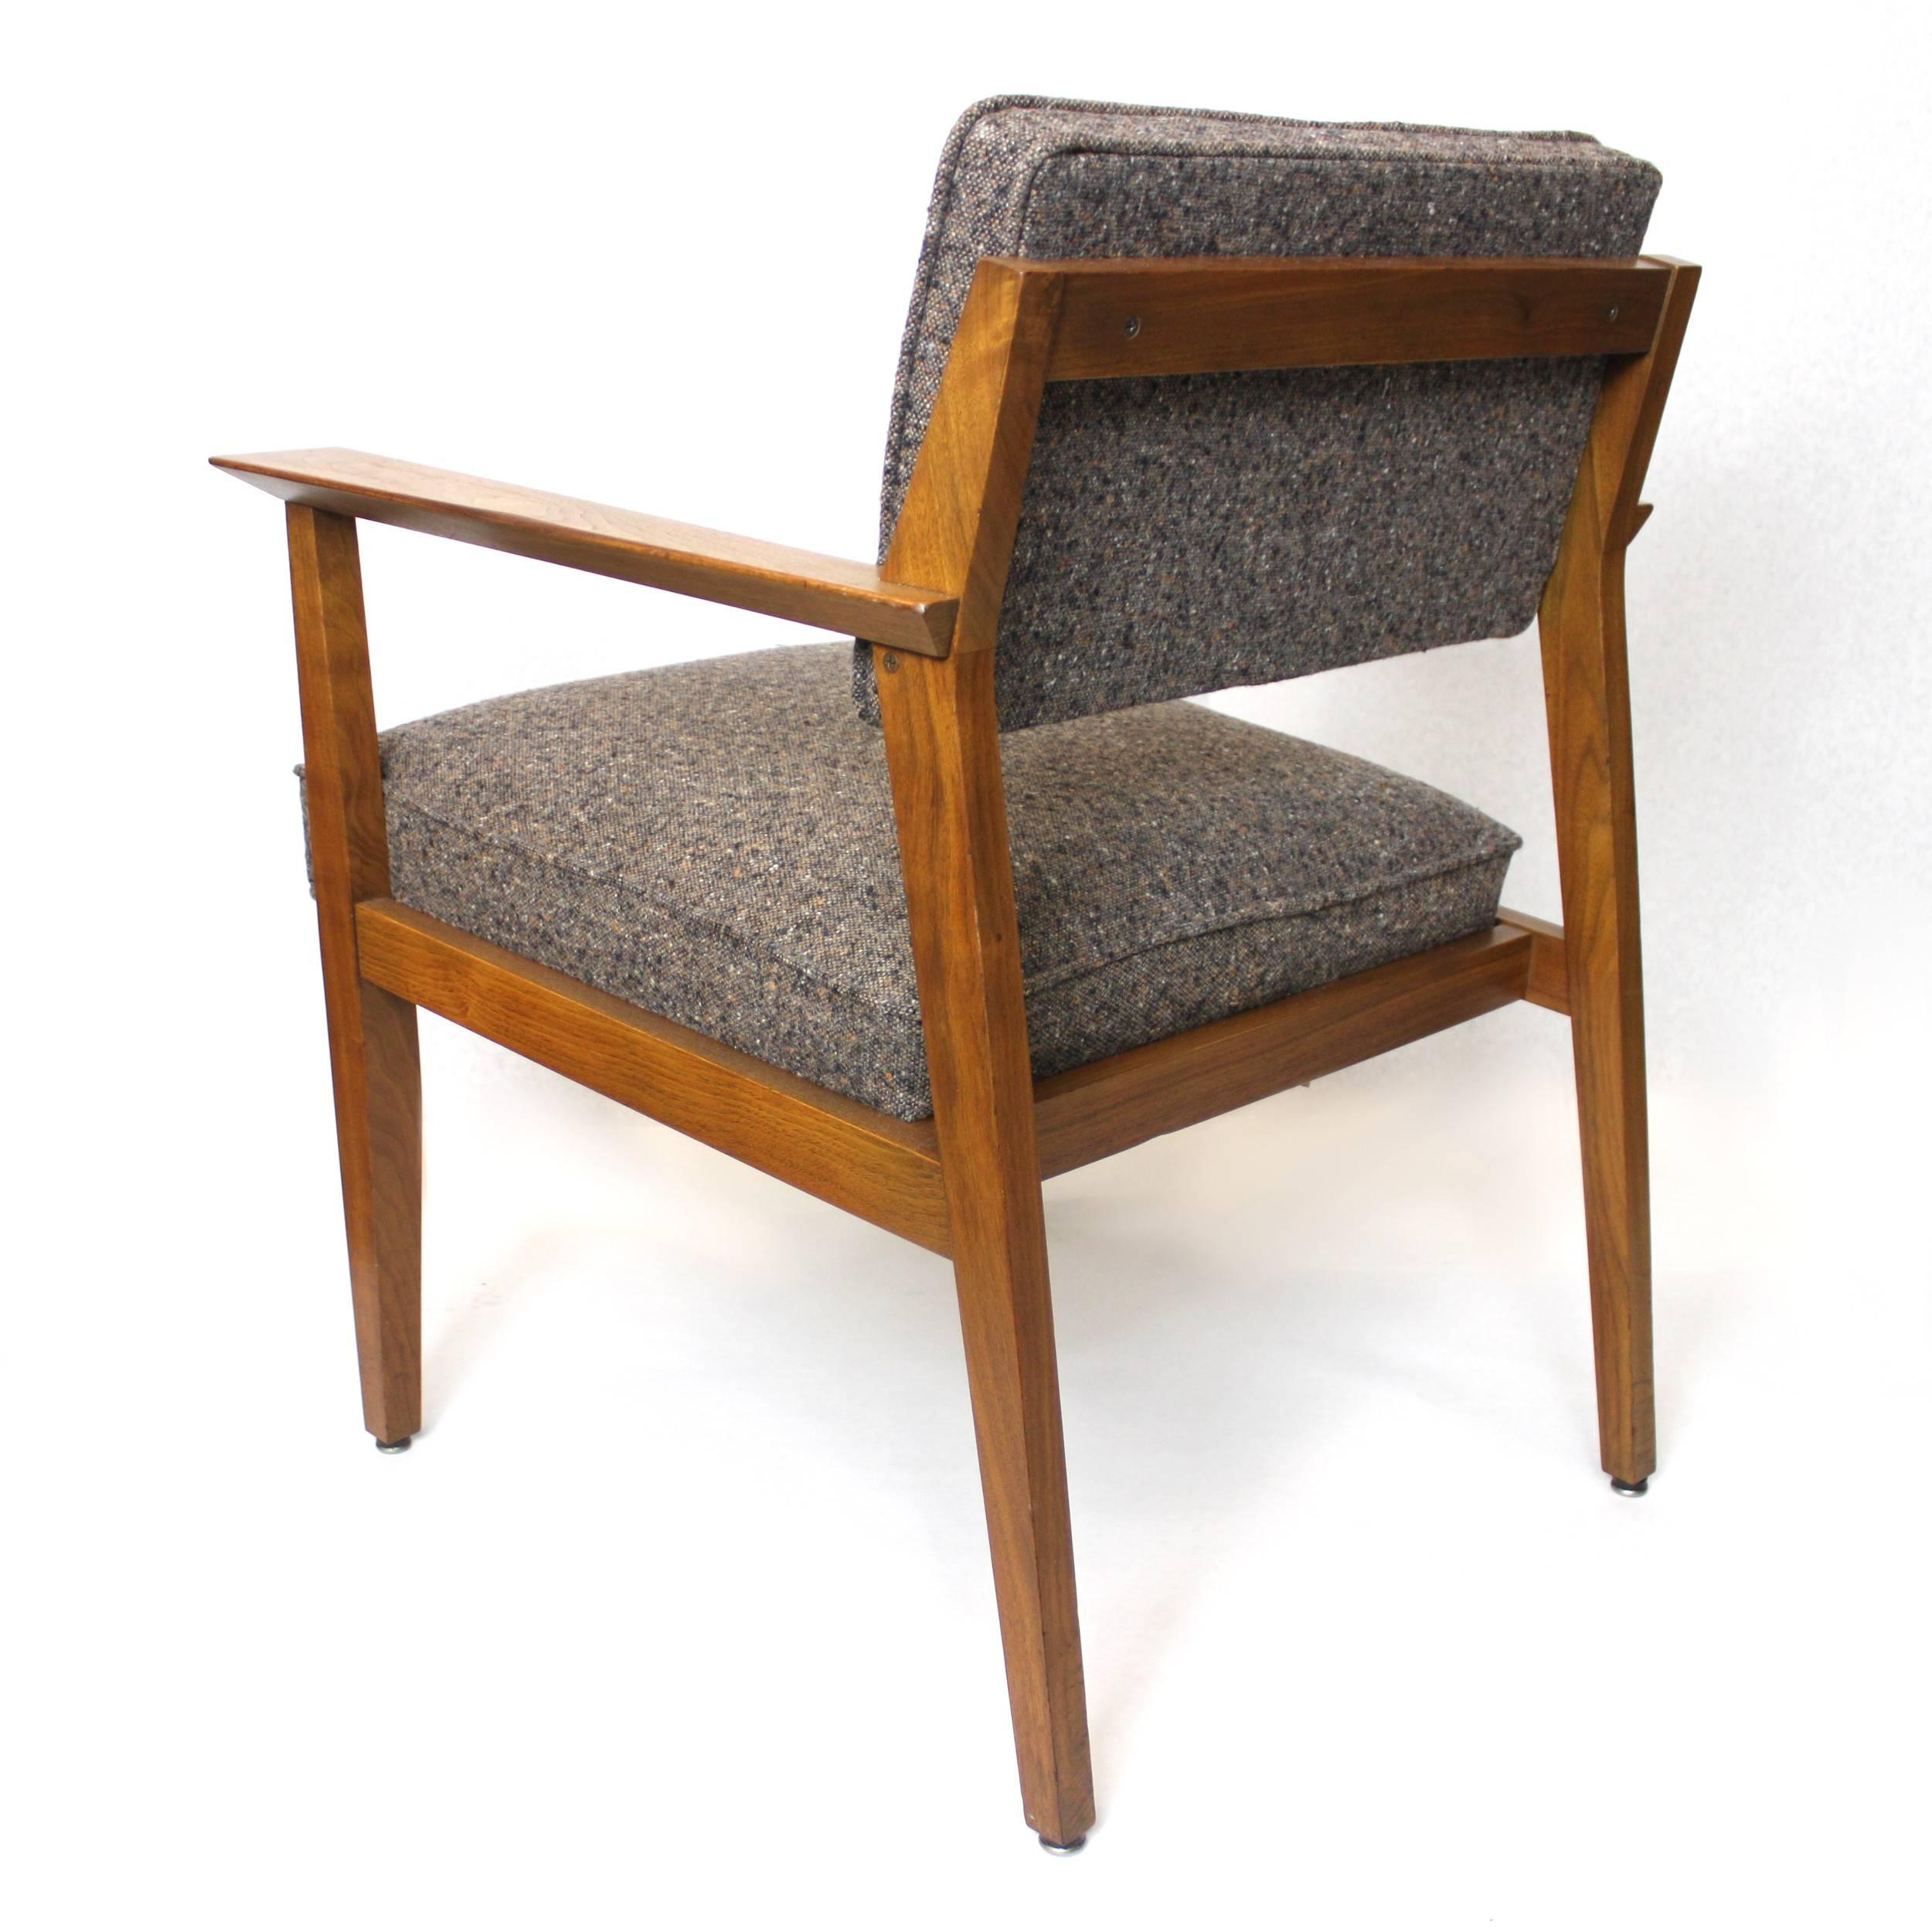 Mid-20th Century Fantastic Pair of Mid-Century Modern Walnut Lounge Chairs by Stow Davis